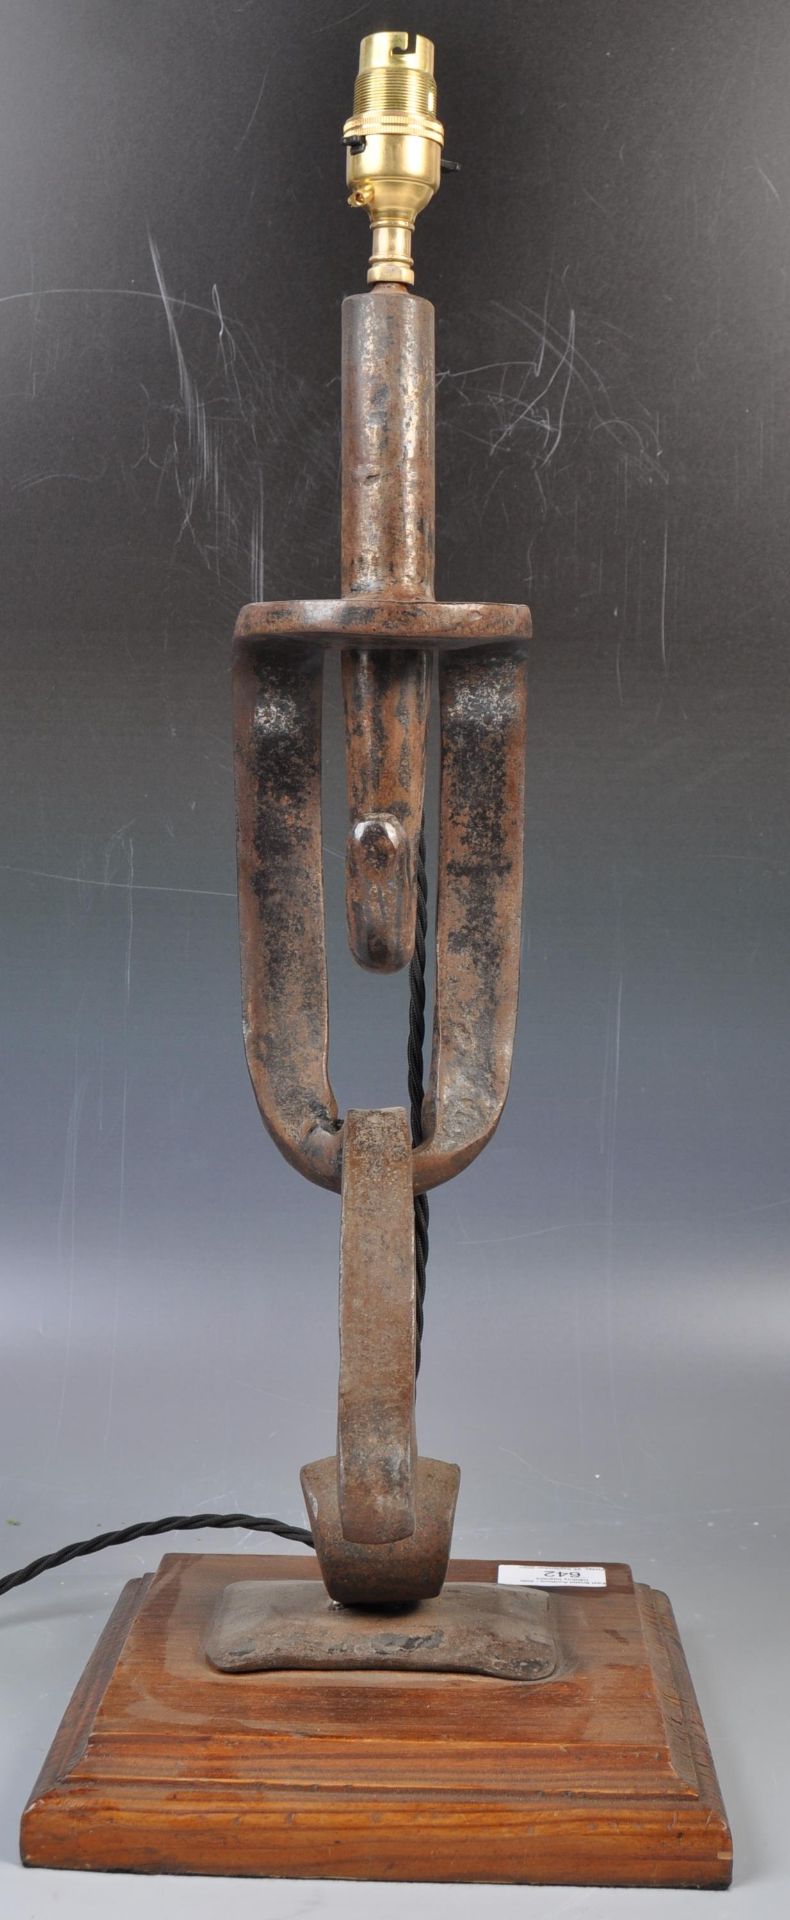 20TH CENTURY ARCHITECTURAL INDUSTRIAL WROUGHT IRON LAMP - Image 4 of 5